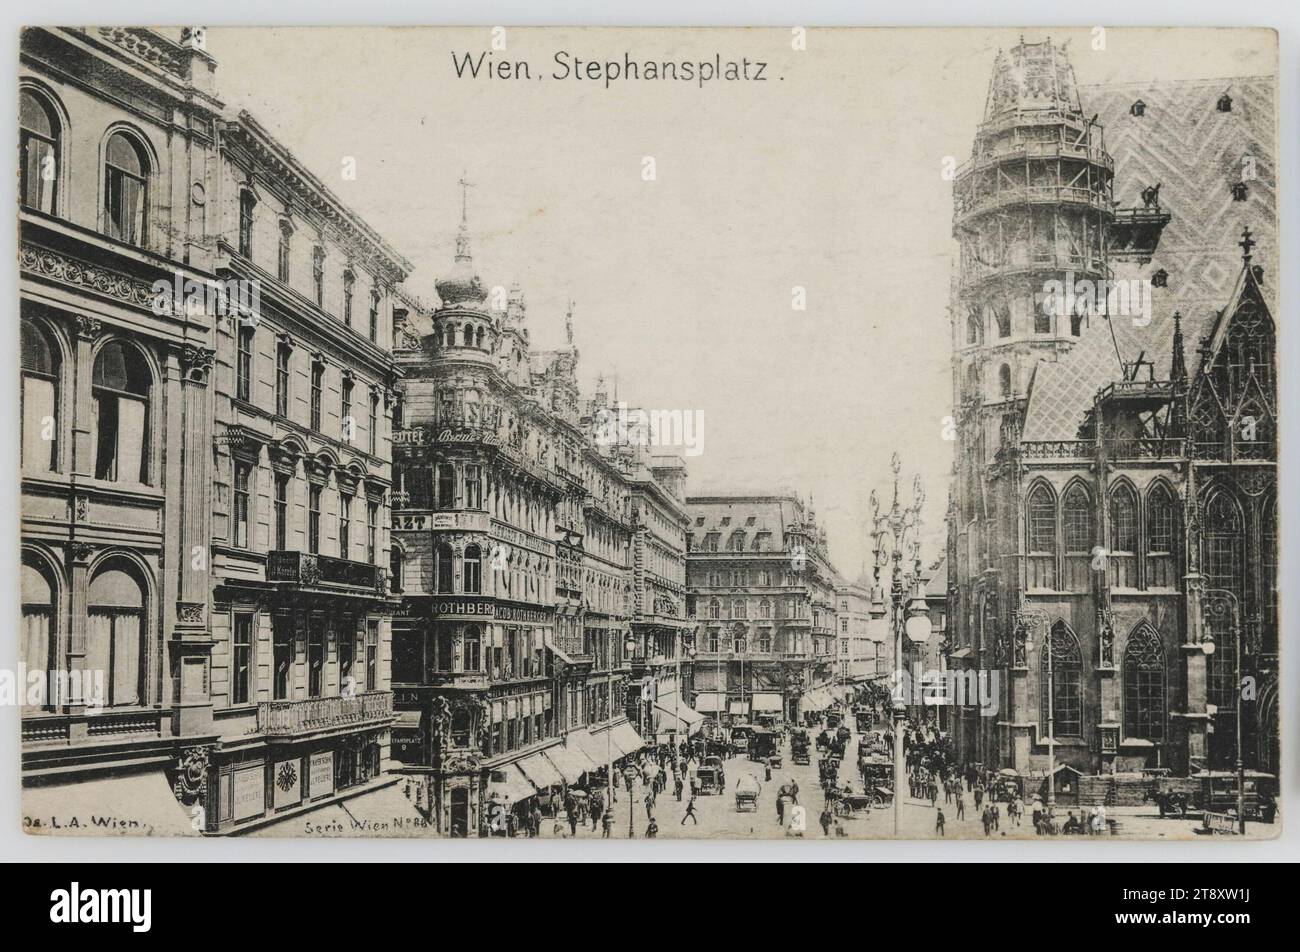 1st, Stephansplatz - view from Stock-im-Eisen-Platz towards Rotenturmstraße, picture postcard, Österreichische Lichtdruck-Anstalt, Producer, 1904, paperboard, Collotype, St. Stephan's Cathedral, Attractions, Construction, 1st District: Innere Stadt, square, place, circus, etc., the usual house or row of houses, flat-building, apartment house, house combined with store, with people, church (exterior), street lighting, four-wheeled, animal-drawn vehicle, e.g.: cab, carriage, coach, diligence, omnibus, horse-tram, (farm) wagon, freight wagon, cart, street, Stephansplatz Stock Photo